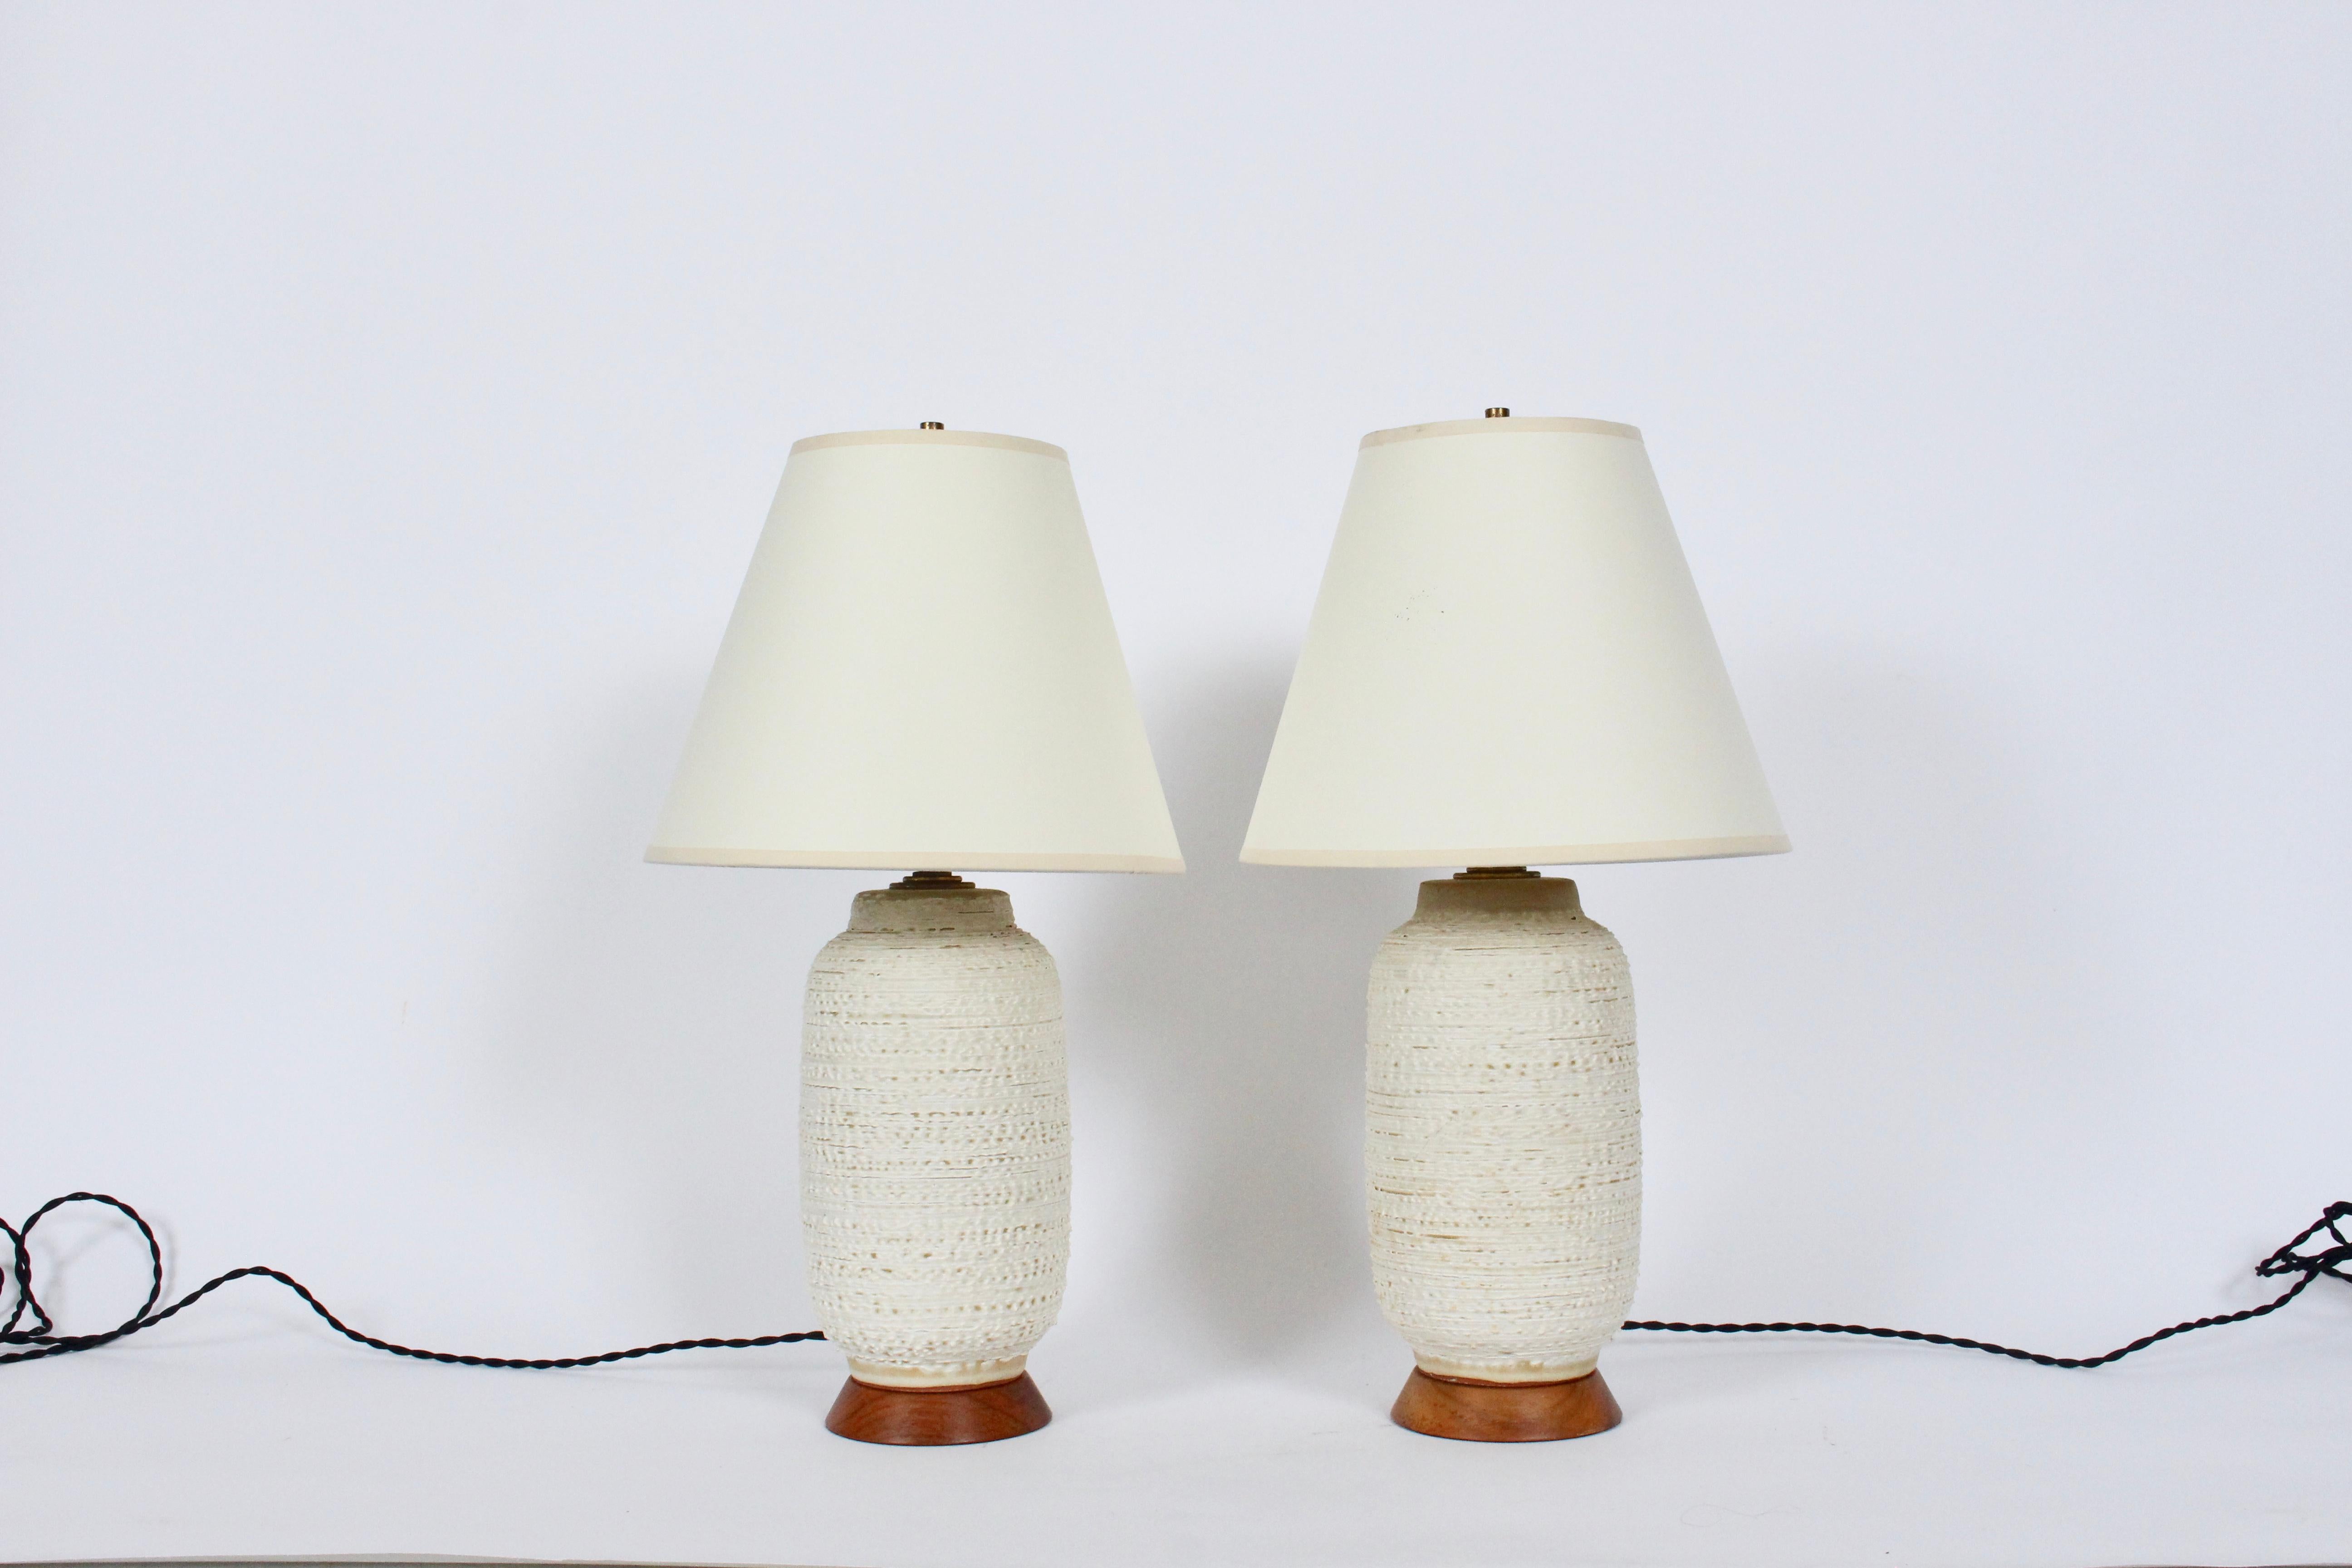 American Mid Century Modern Lee Rosen for Design Technics textured, glazed pottery bedside lamps. Featuring handcrafted petite and rare Design Technics forms with stipple glaze a top flared Walnut bases. 13H to top of sockets. 10H to top of Ceramic.